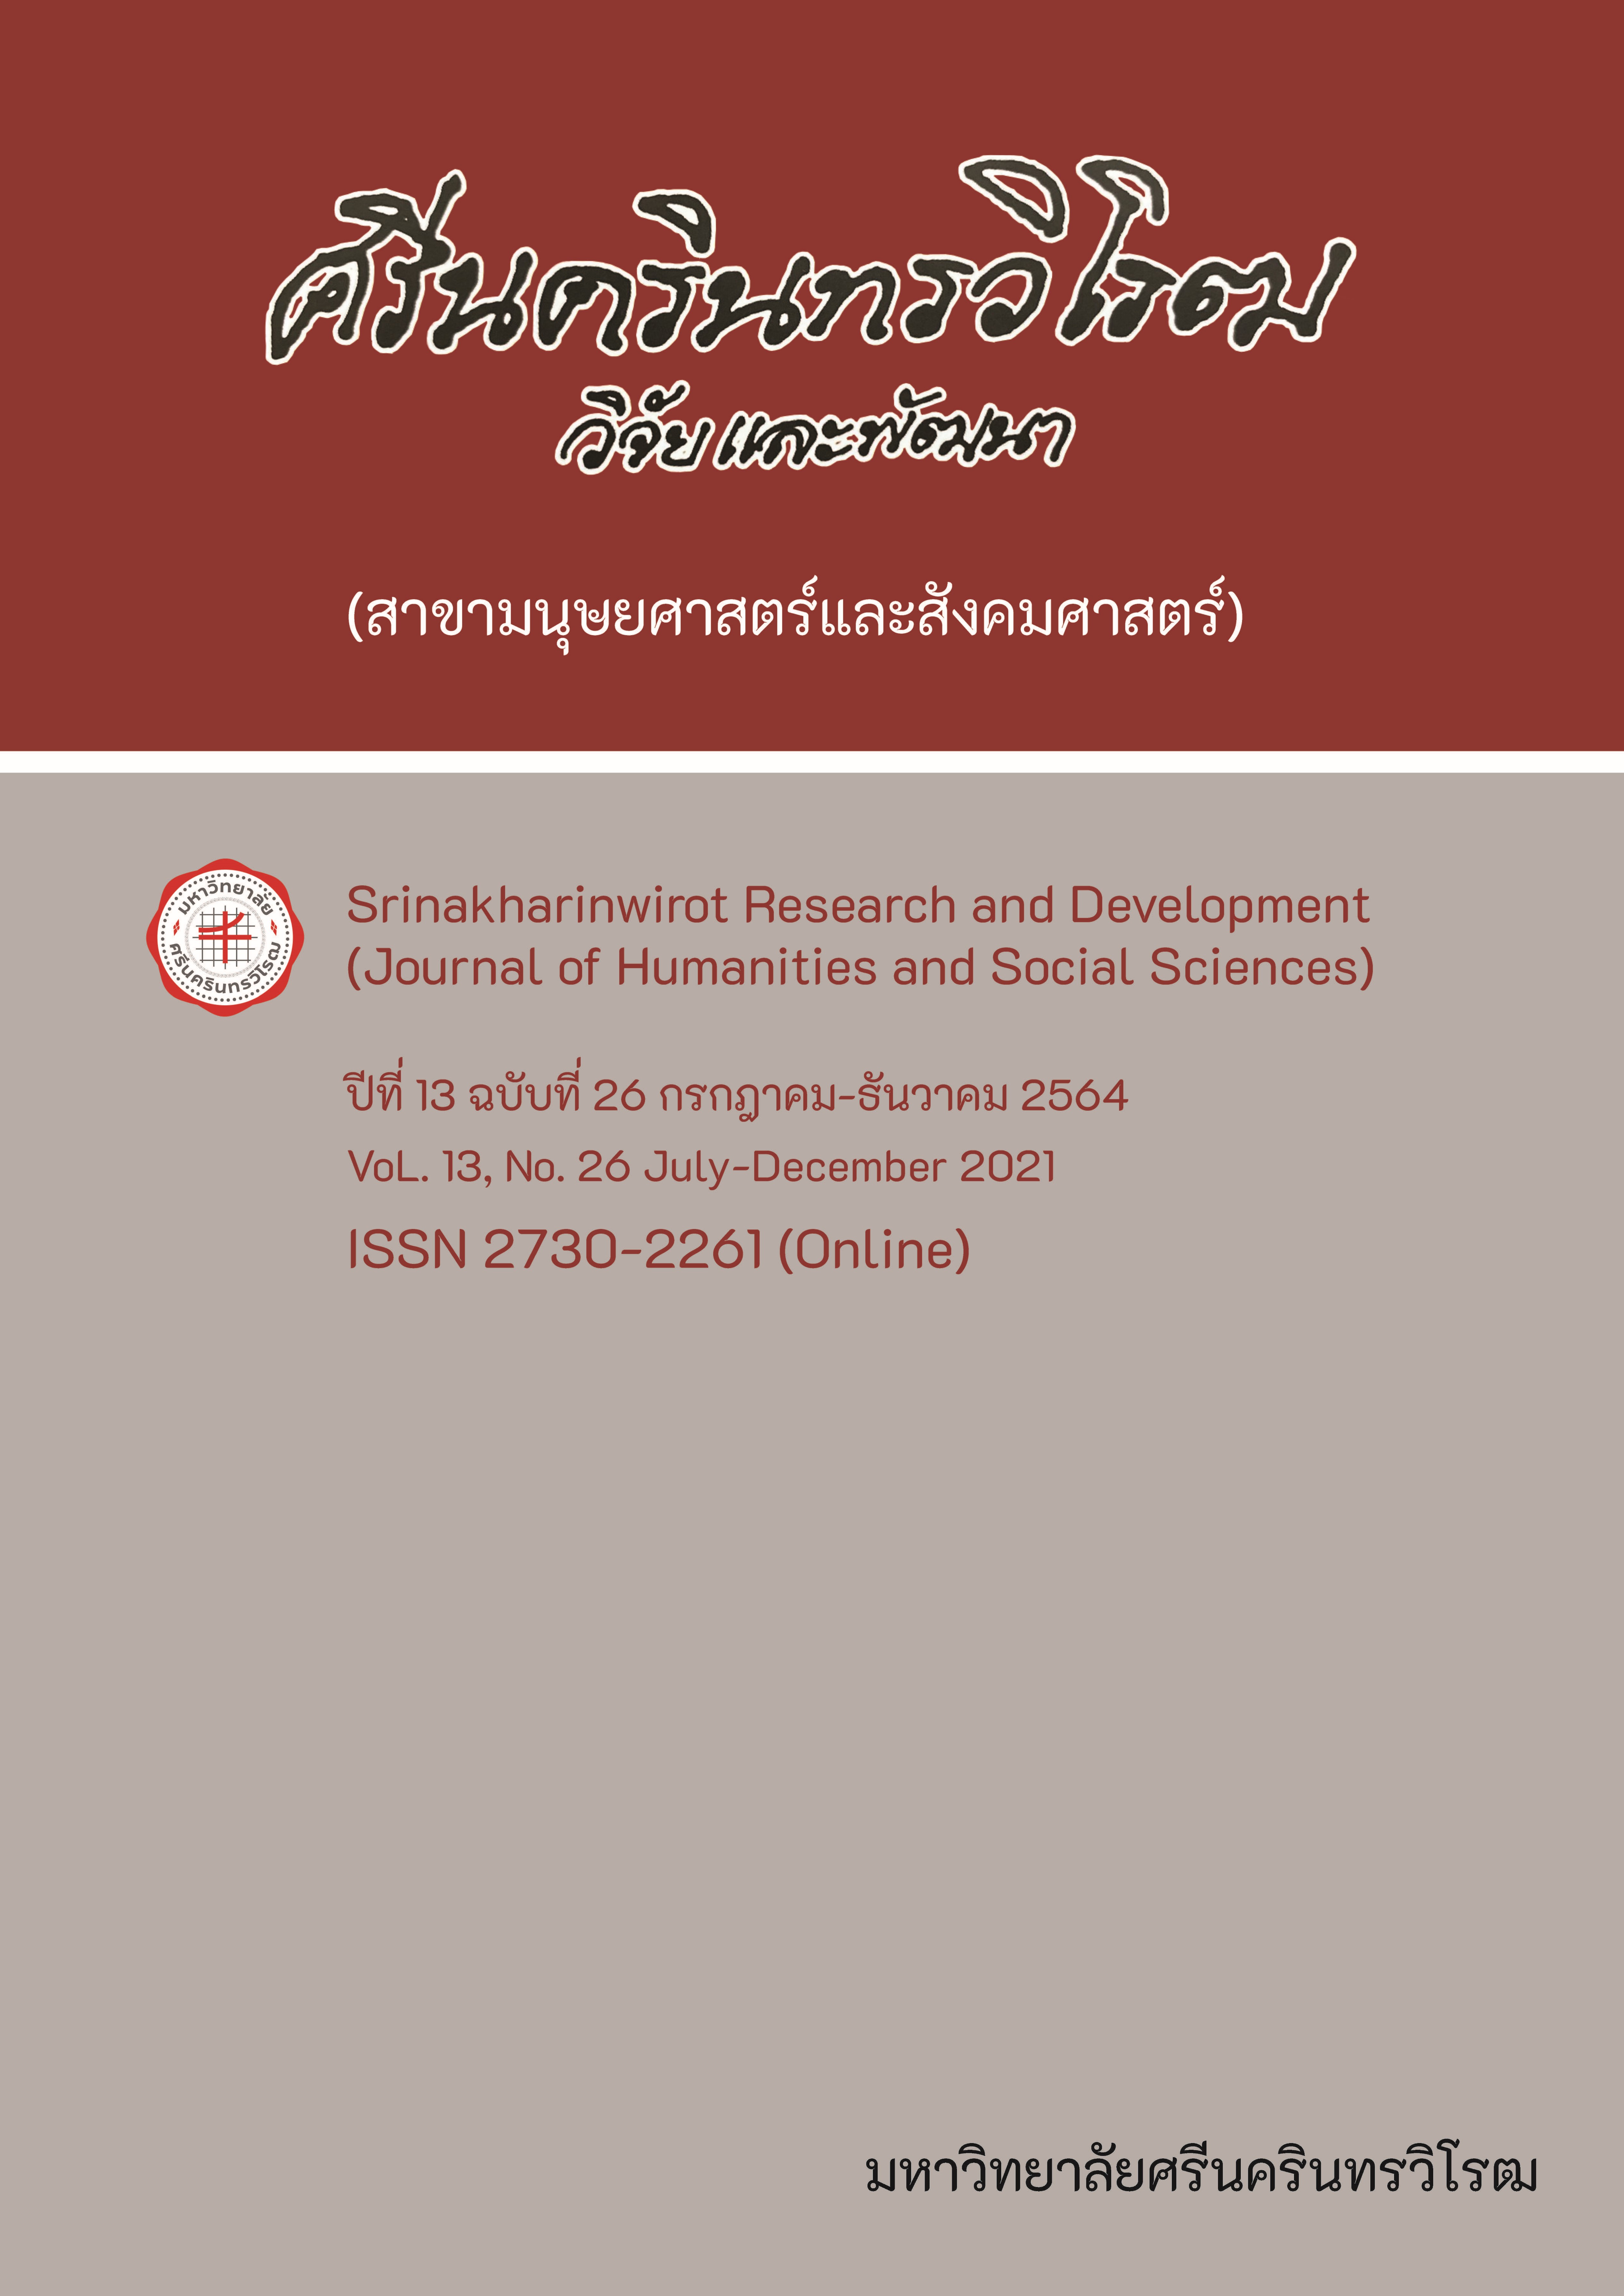 					View Vol. 13 No. 26 (2021): Srinakharinwirot Research and Development (Journal of Humanities and Social Sciences)
				